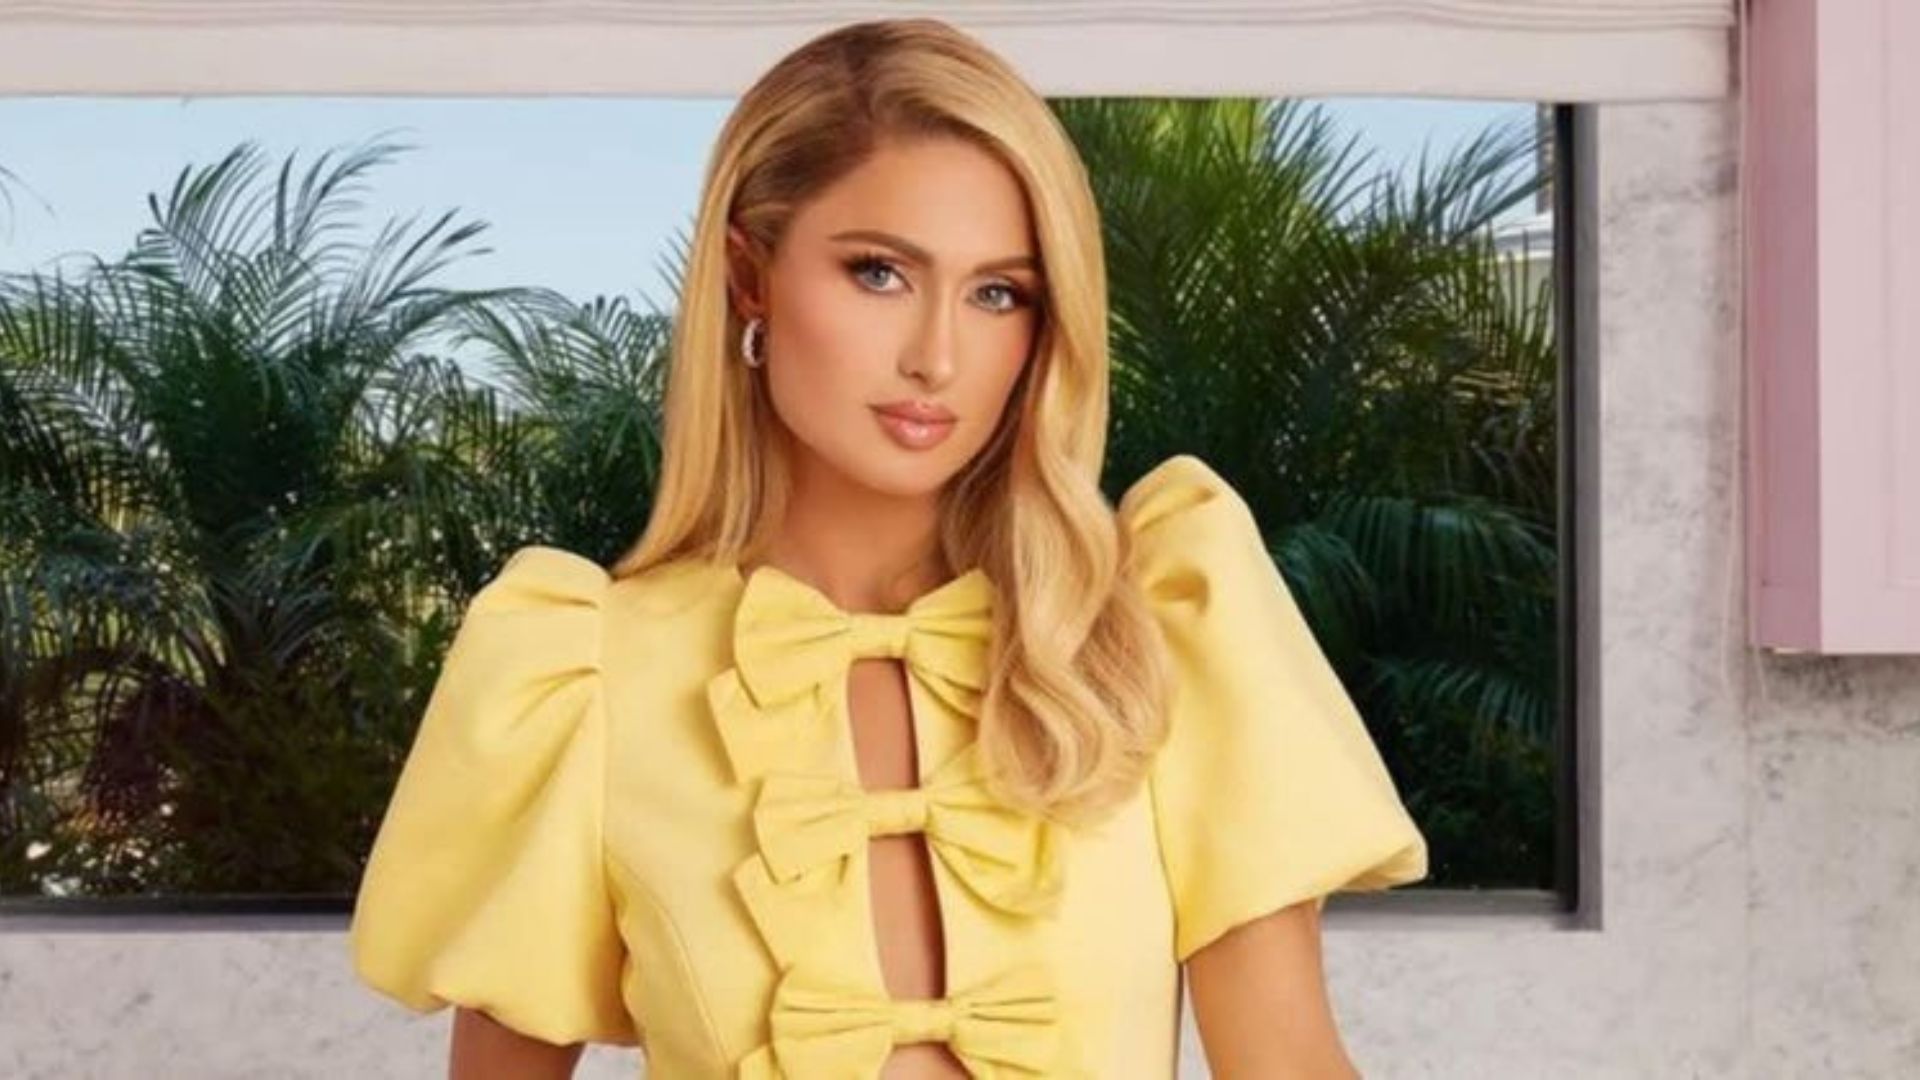 Paris Hilton Reflects on 43rd Birthday, Feels ‘Blessed’ for Life’s Lessons